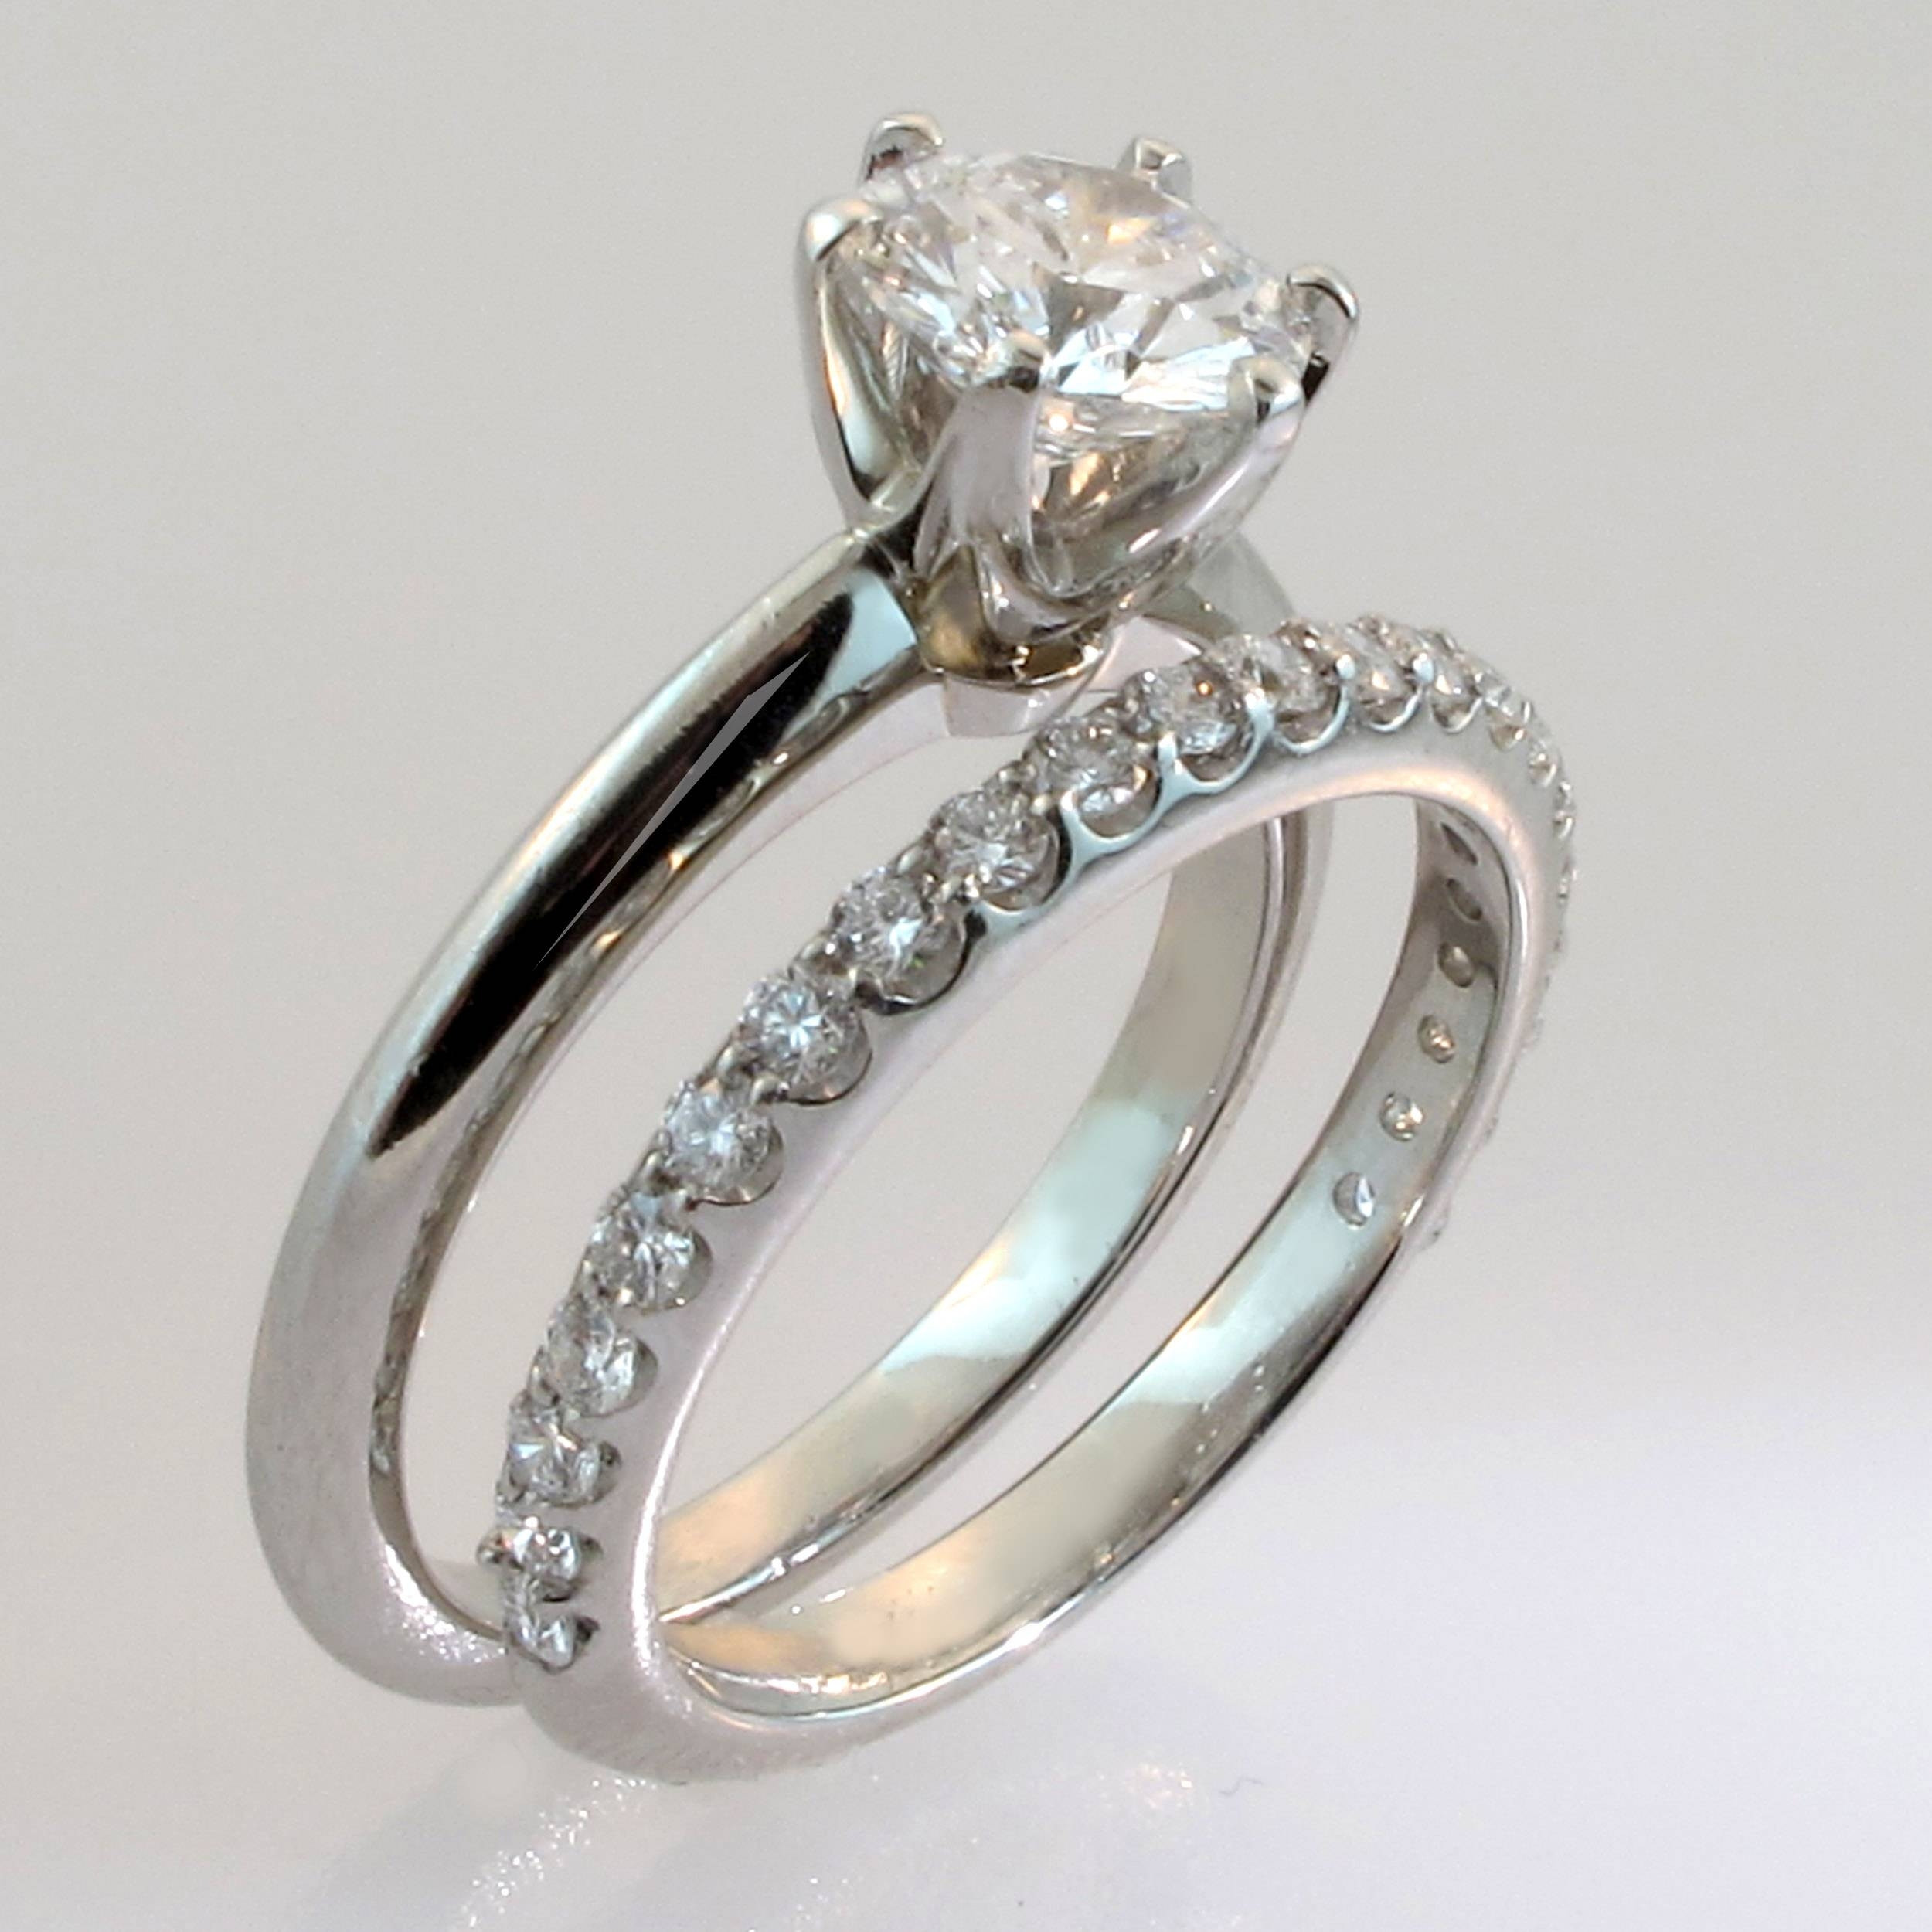 Discount Wedding Rings
 15 Collection of Inexpensive Diamond Wedding Ring Sets